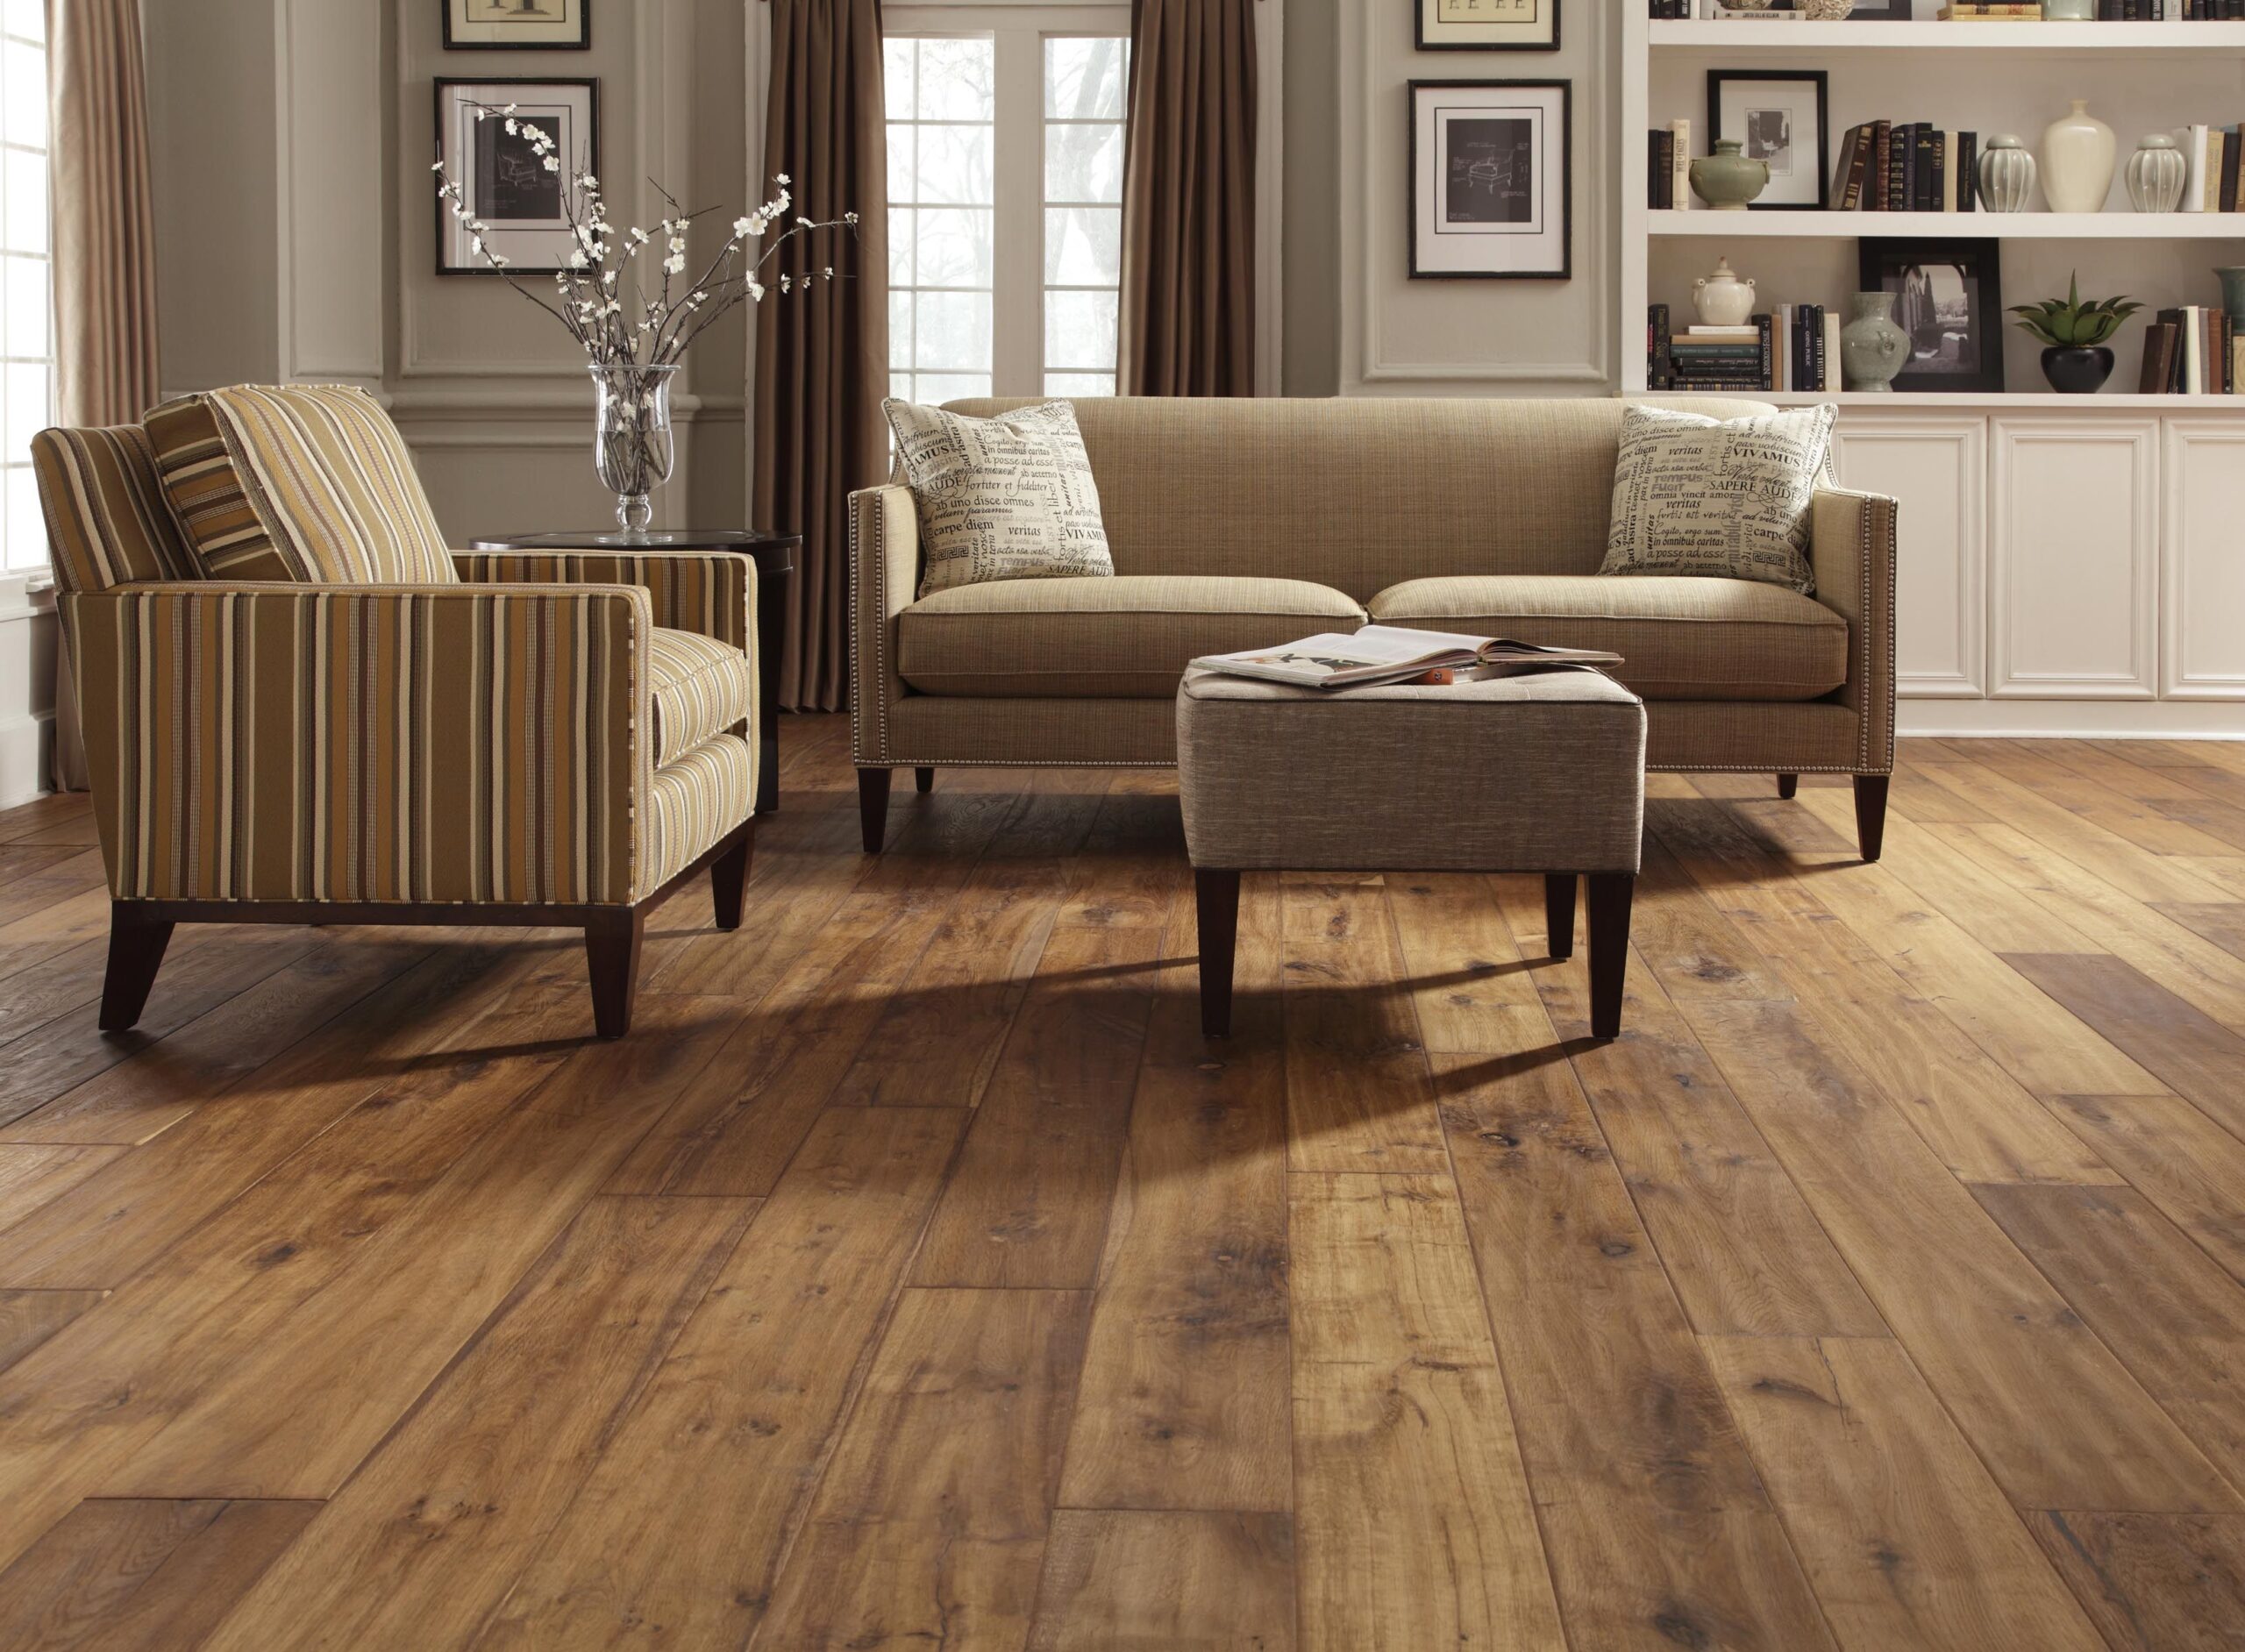 5 Best Laminate Flooring Colours For, What Is A Good Laminate Flooring